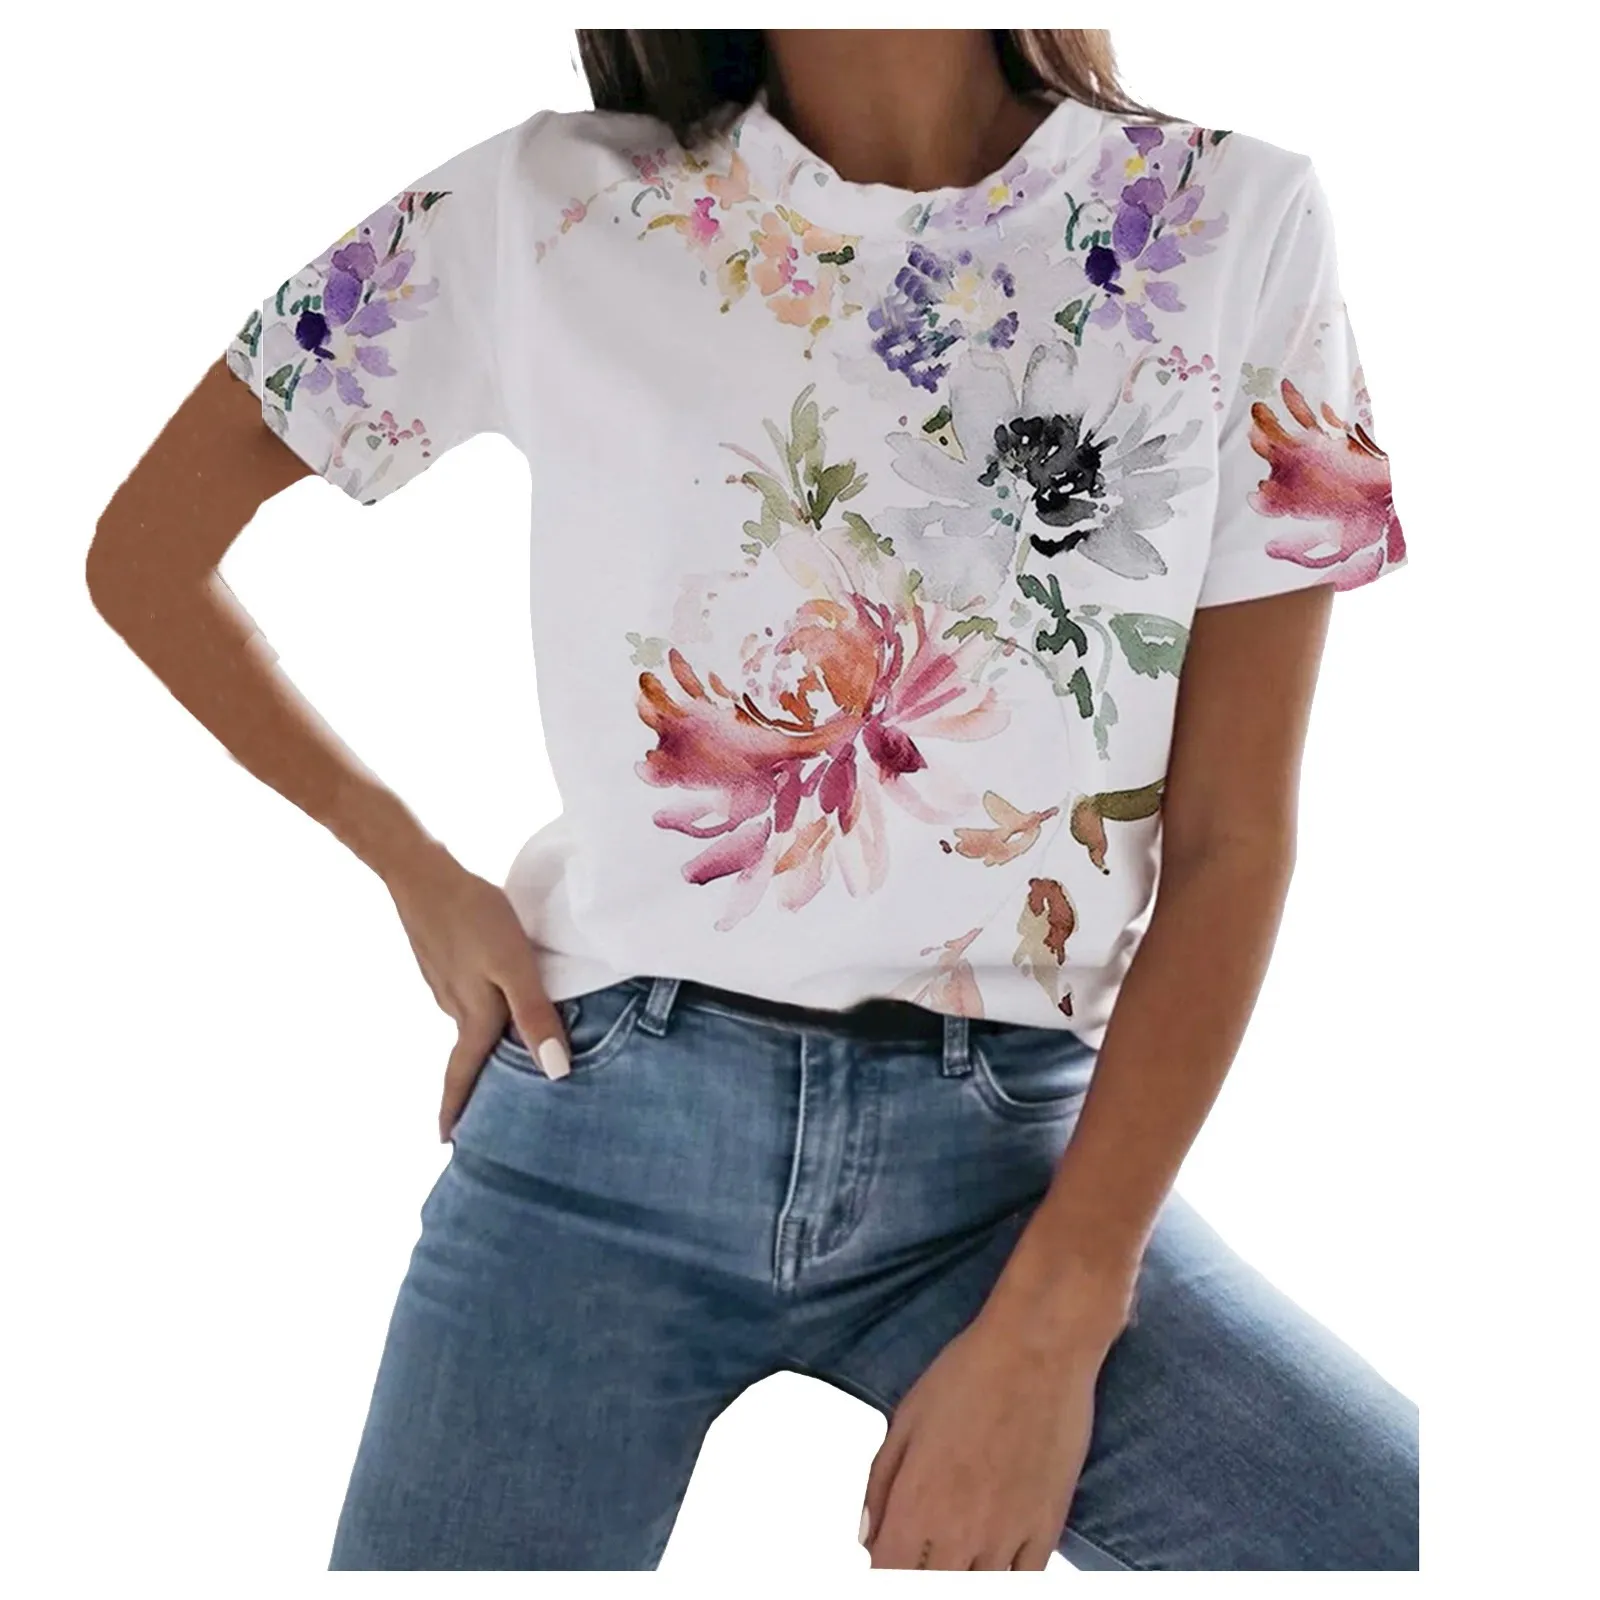 

Tops Unique Casual Floral Print Women Pullovers Vintage Round Collar Summer Short Sleeves Women Blouses Casual Лонгслив Женский